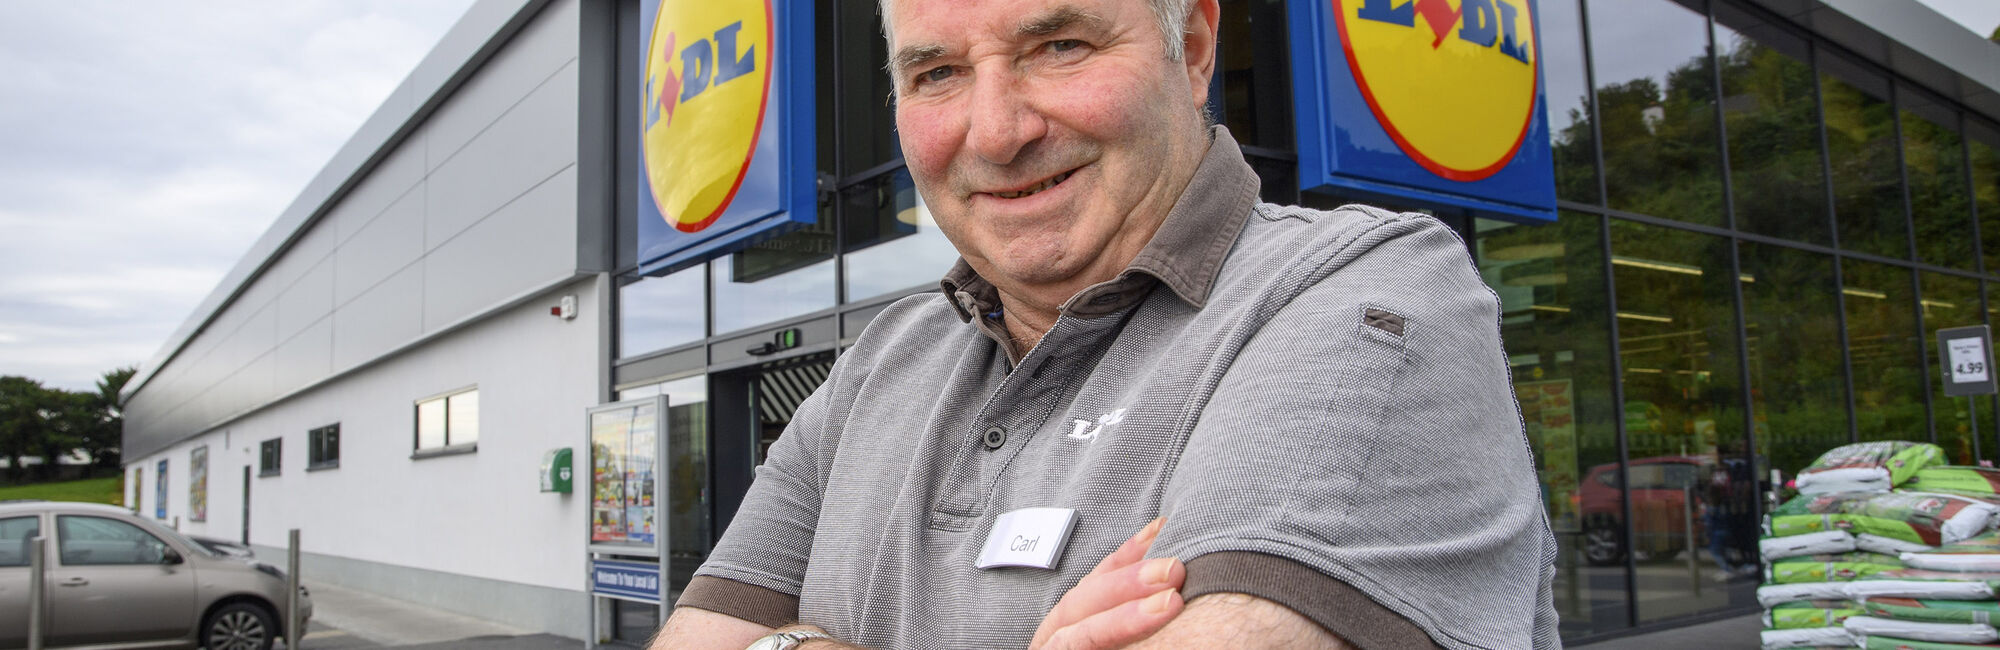 Lidl Ireland to Become First Company in Ireland to Announce Removal of Mandatory Retirement Age